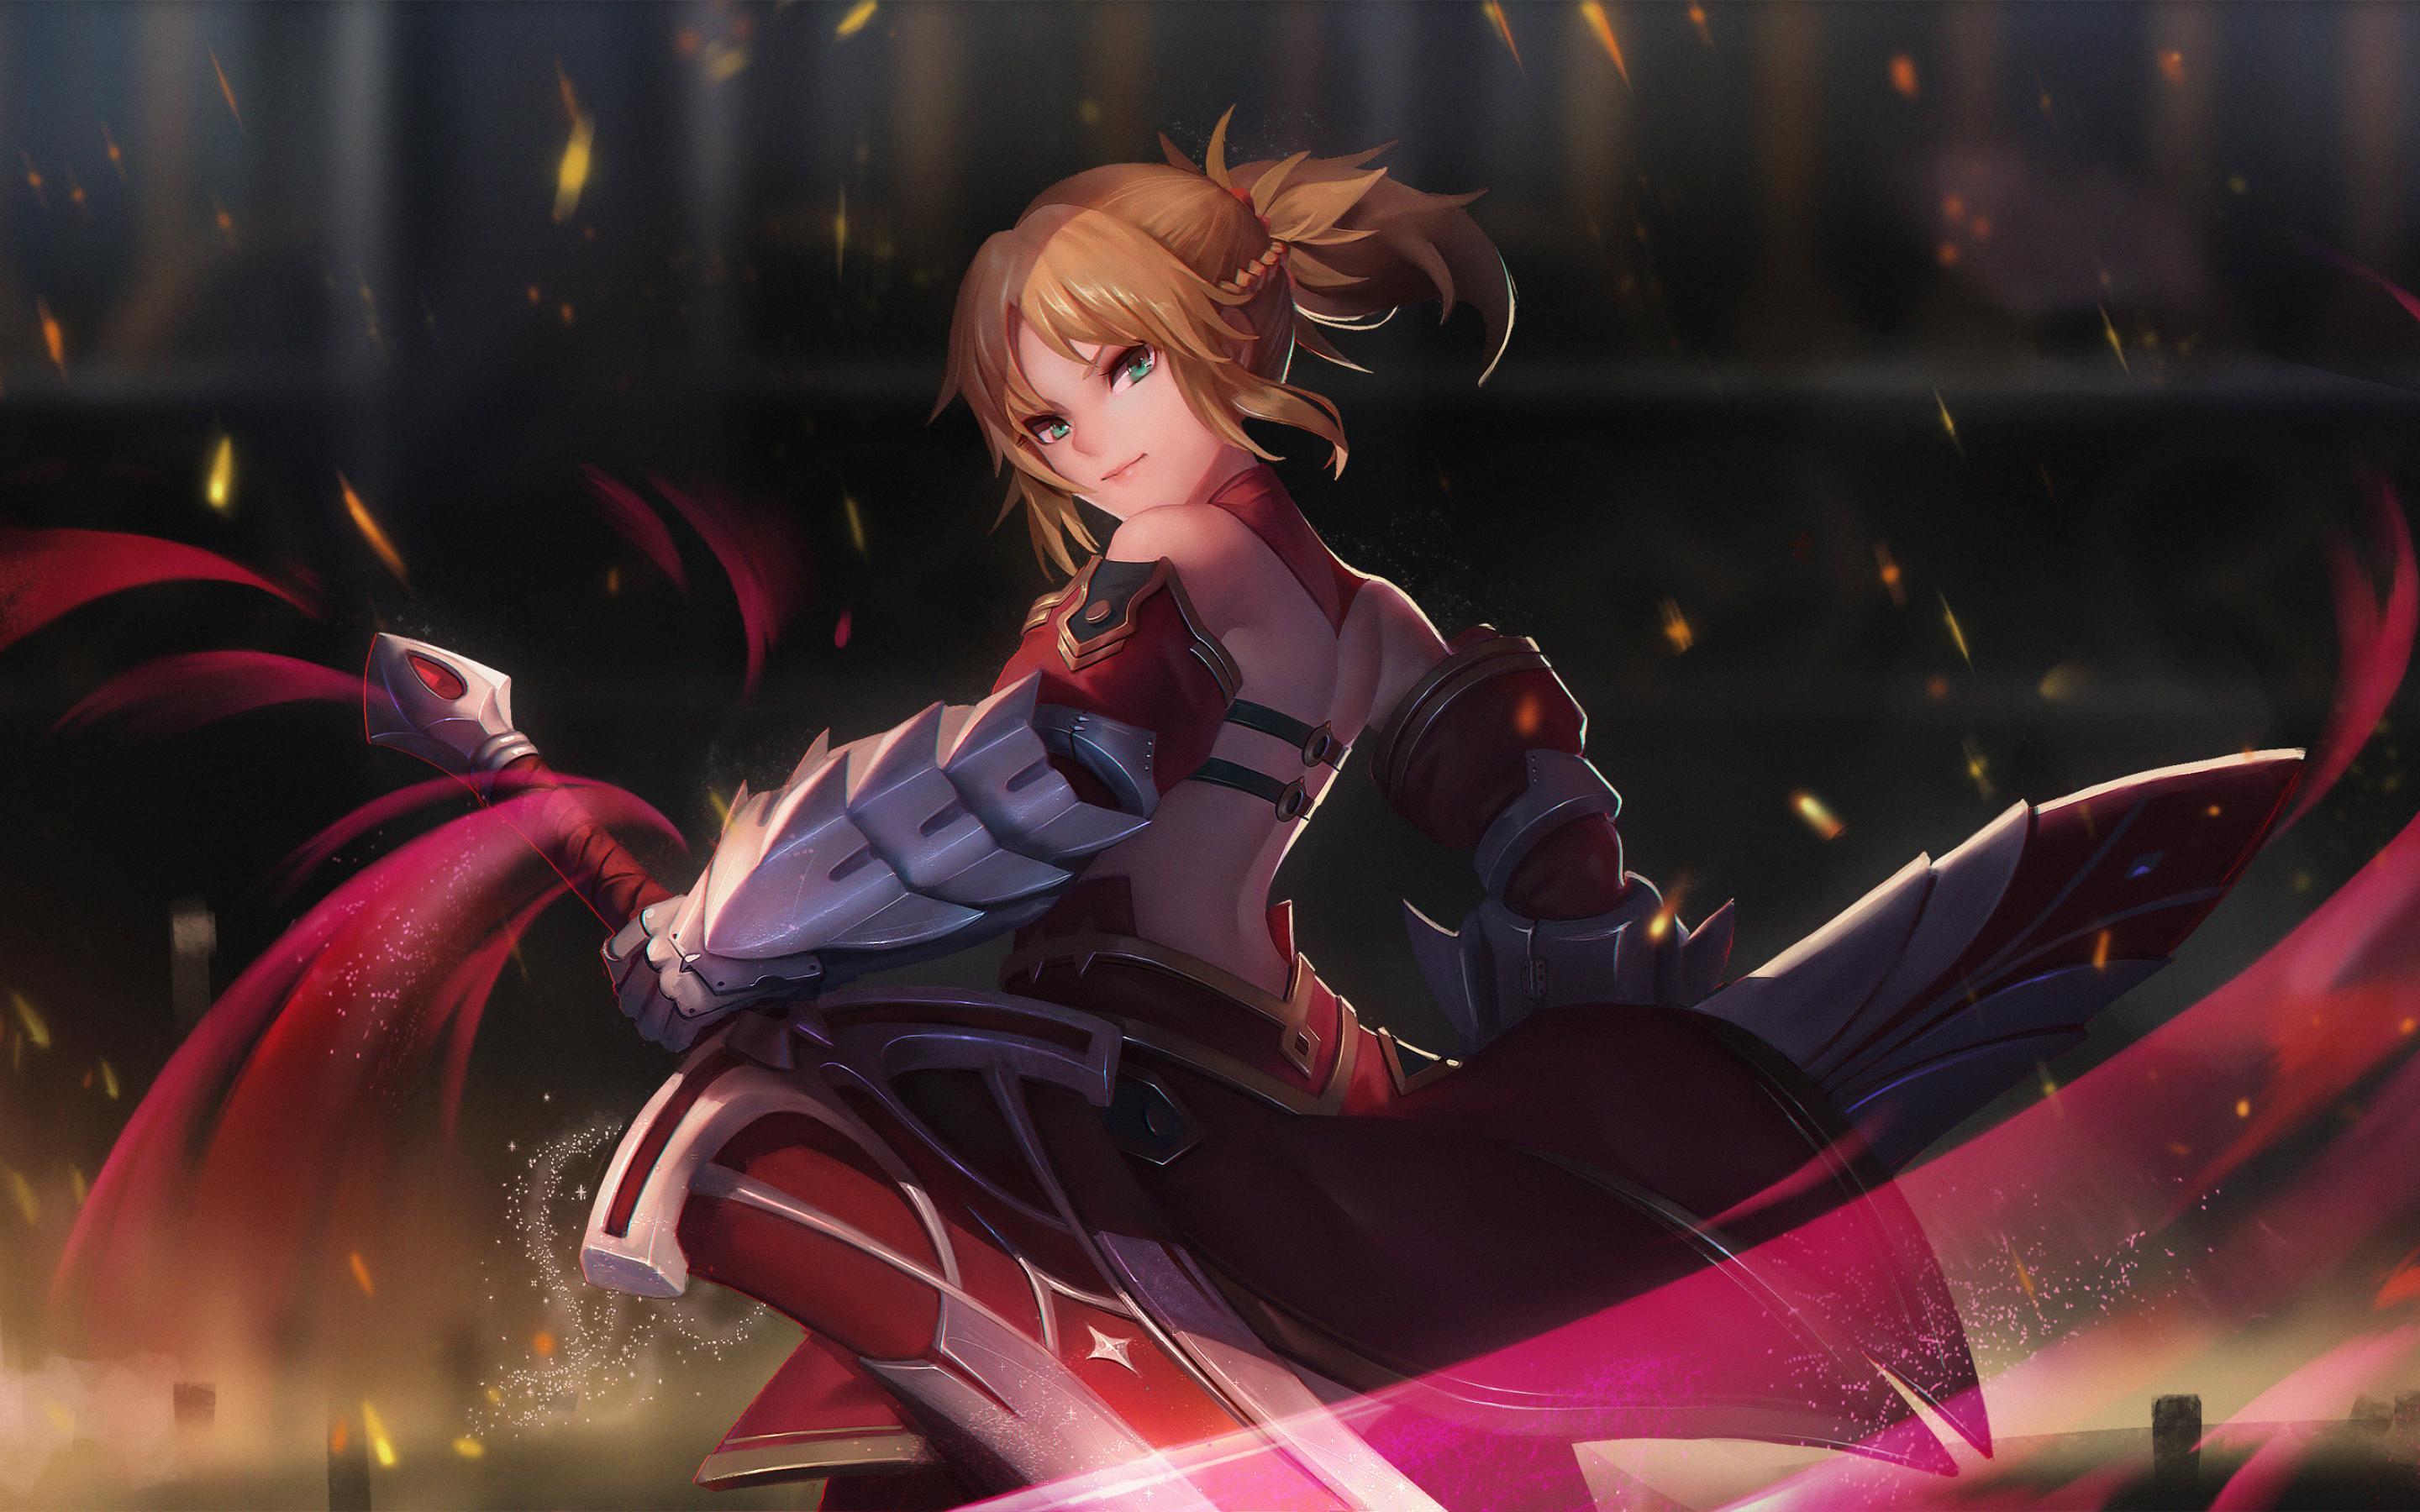 Download wallpapers Mordred, Saber of Red, Fate Apocrypha, manga.